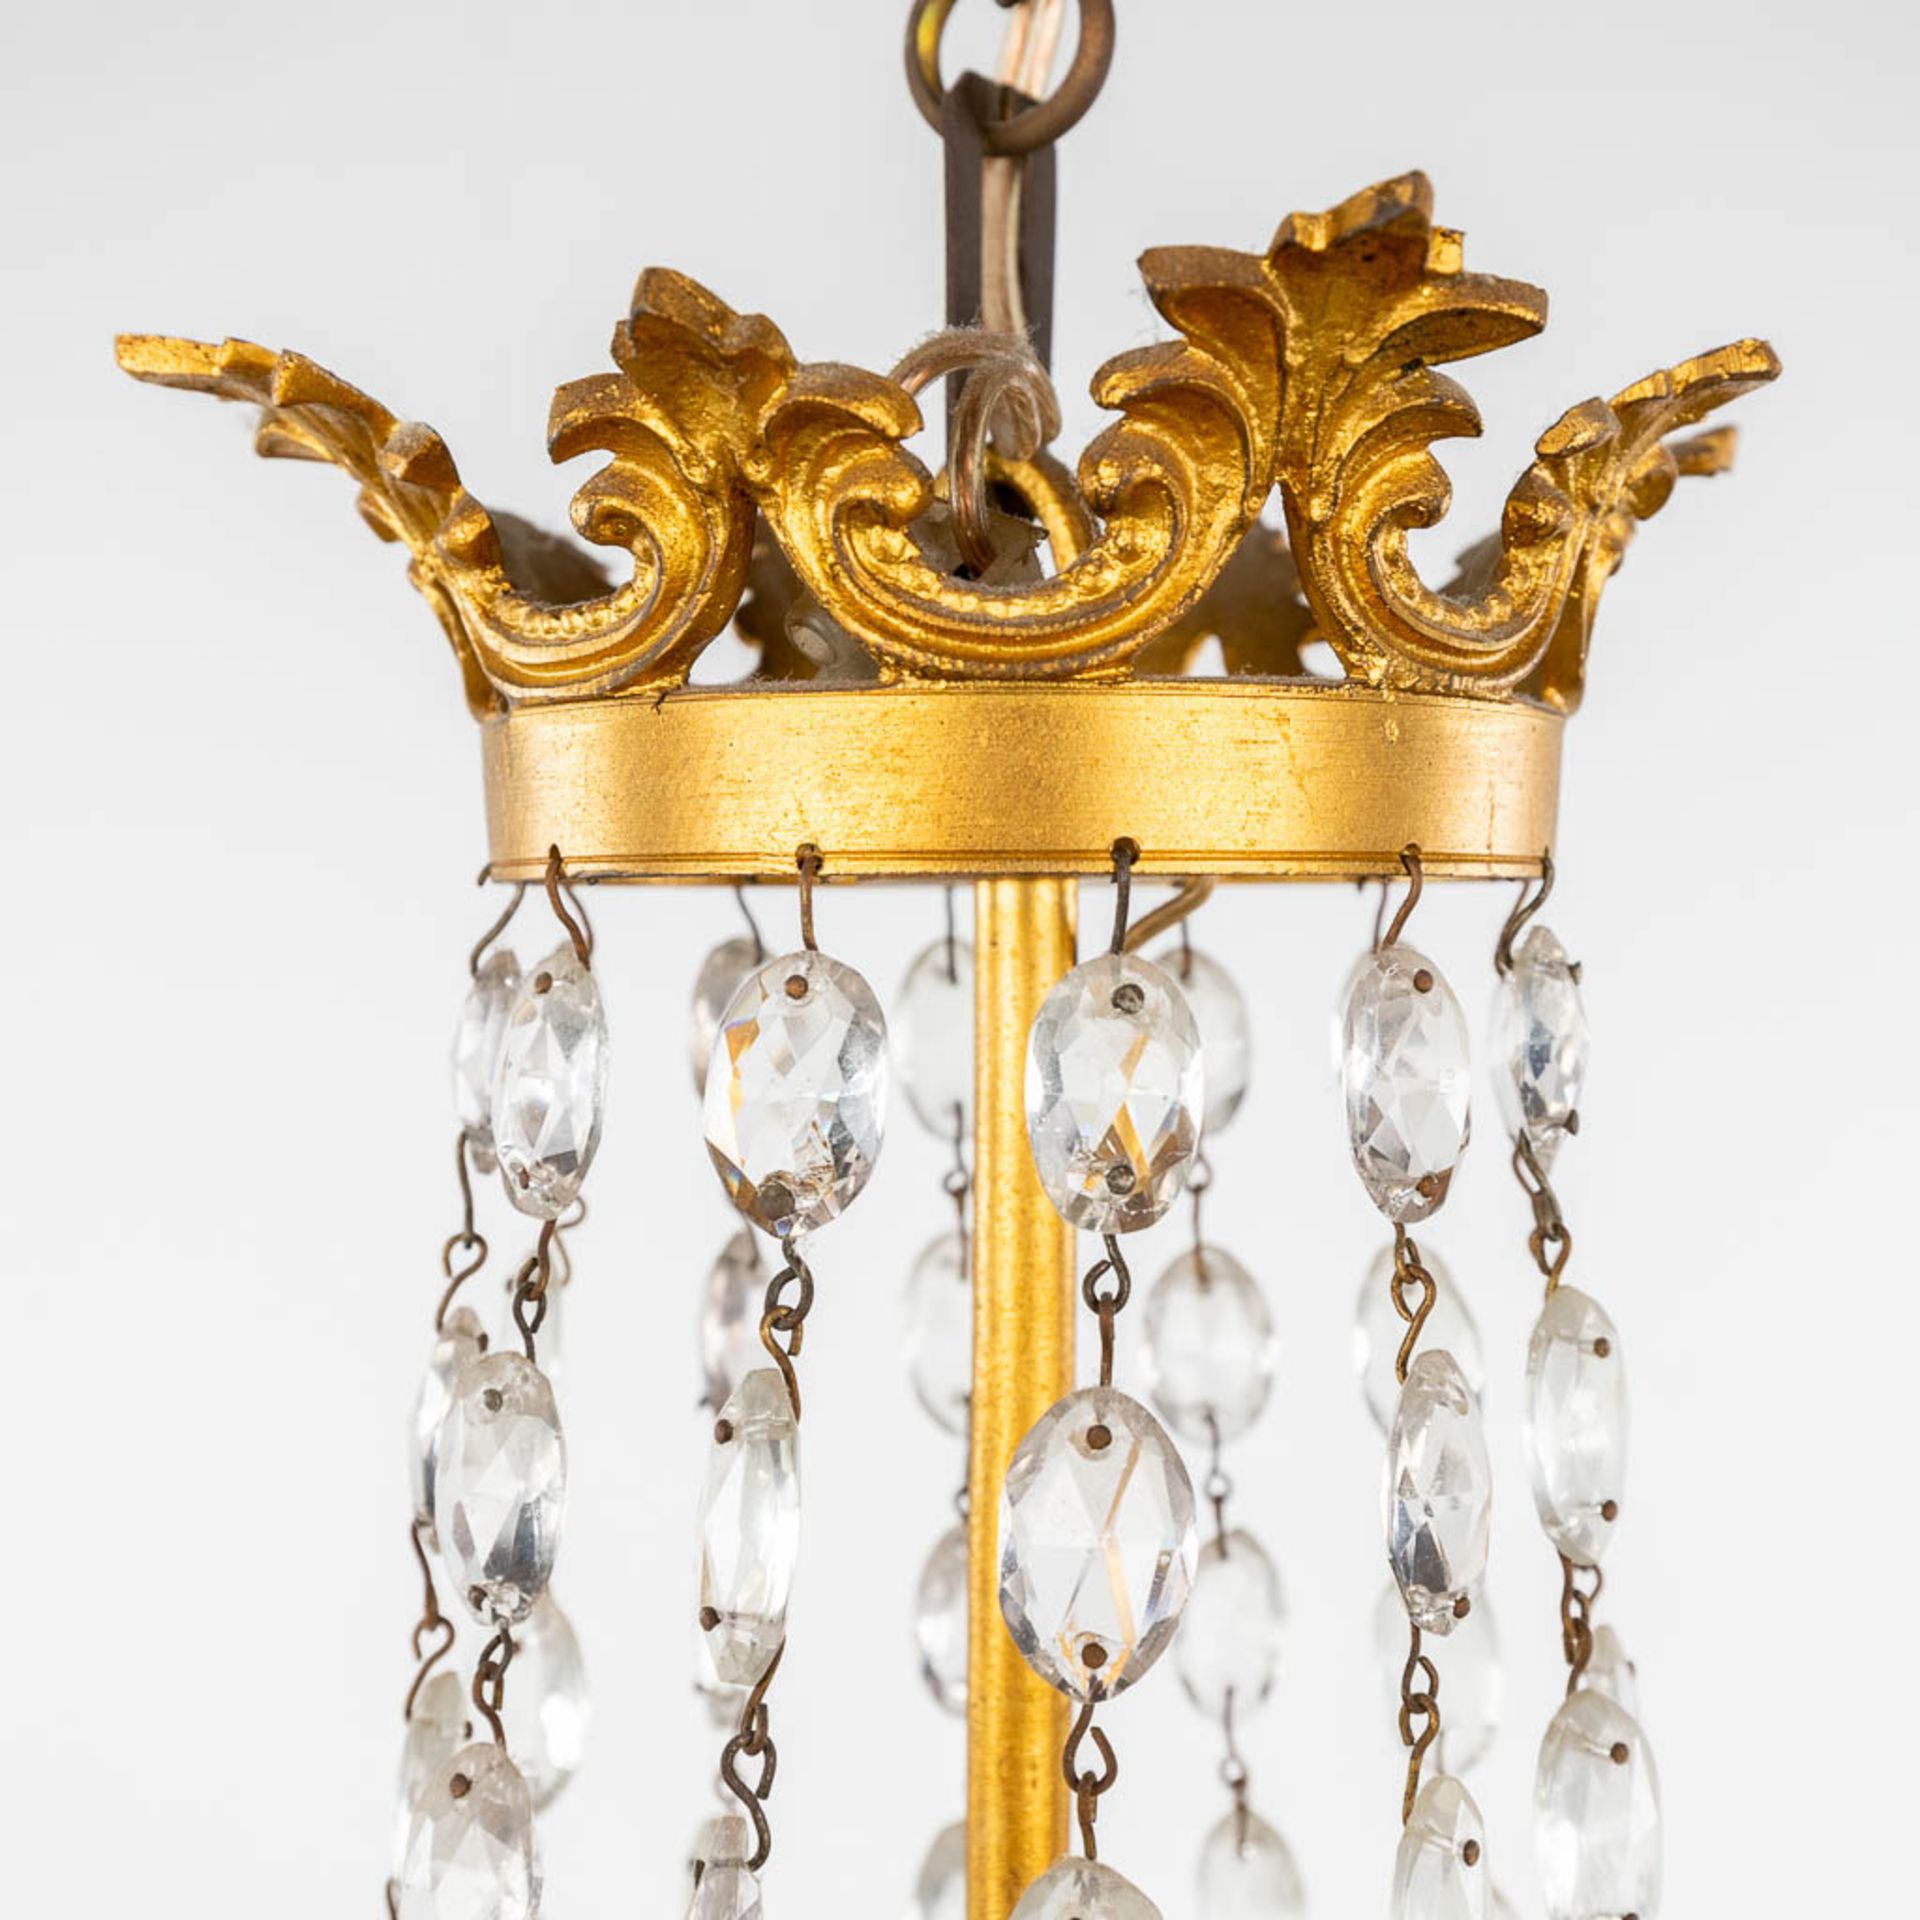 A chandelier 'Sac ˆ Perles', bronze and glass in empire style. 20th C. (H: 100 x D: 50 cm) - Bild 9 aus 11